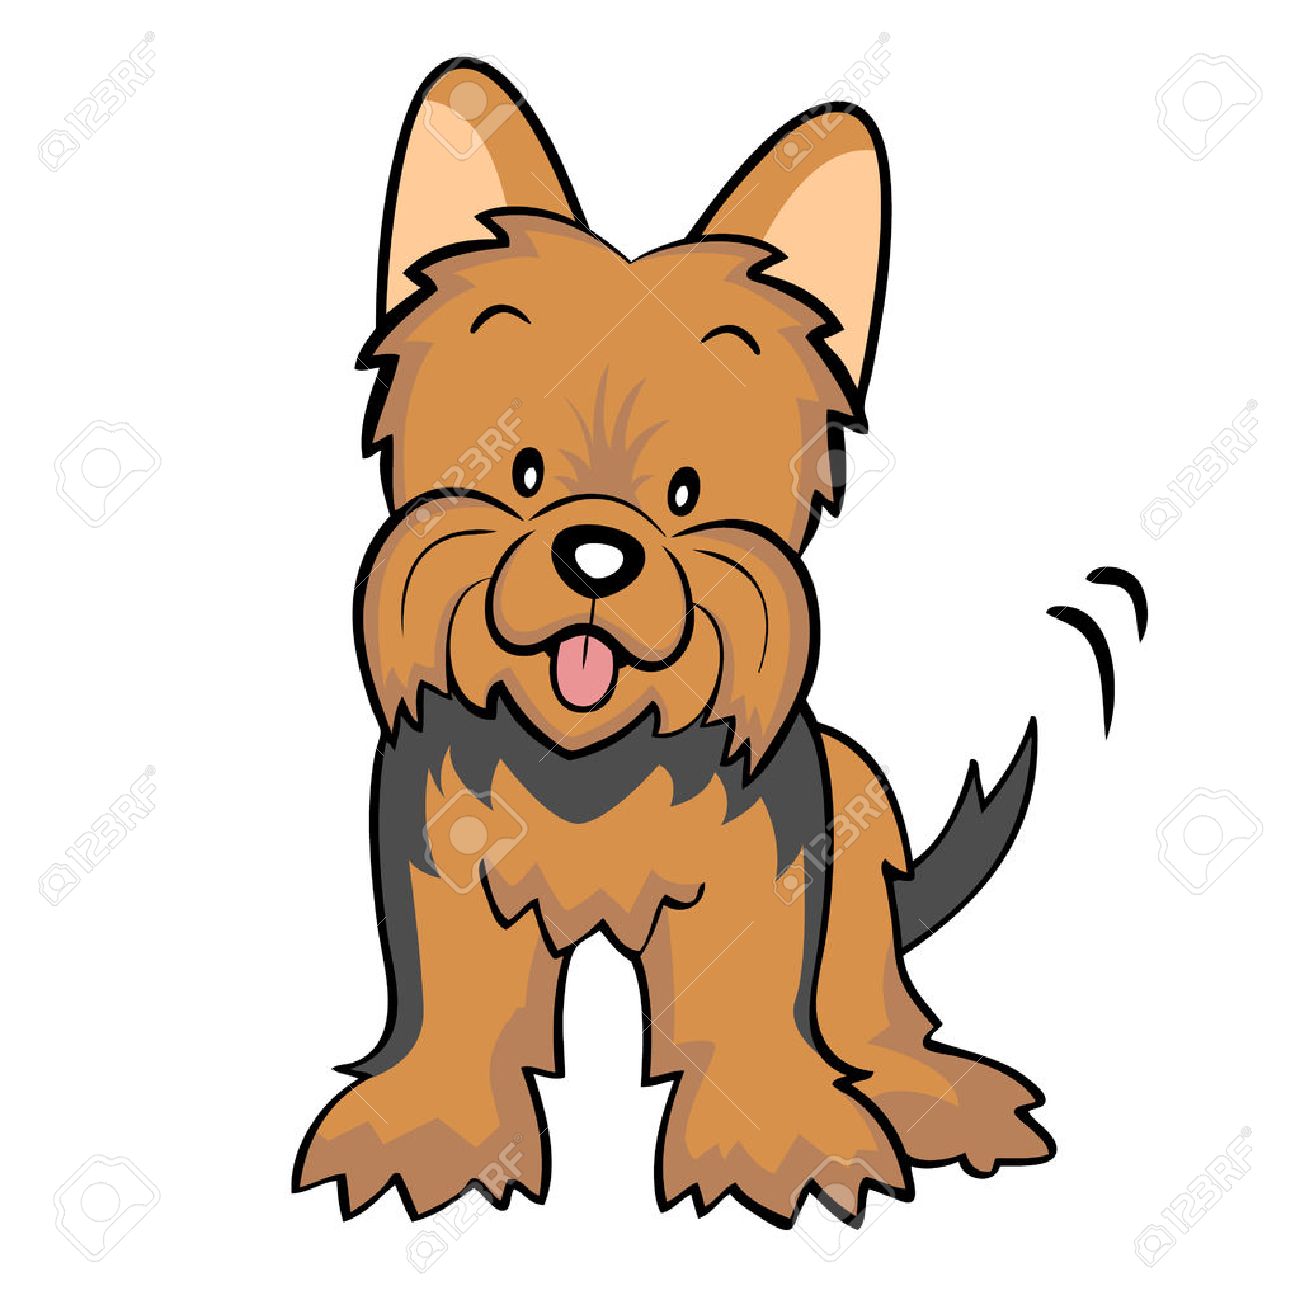 Yorkshire Terrier Clipart at GetDrawings.com.